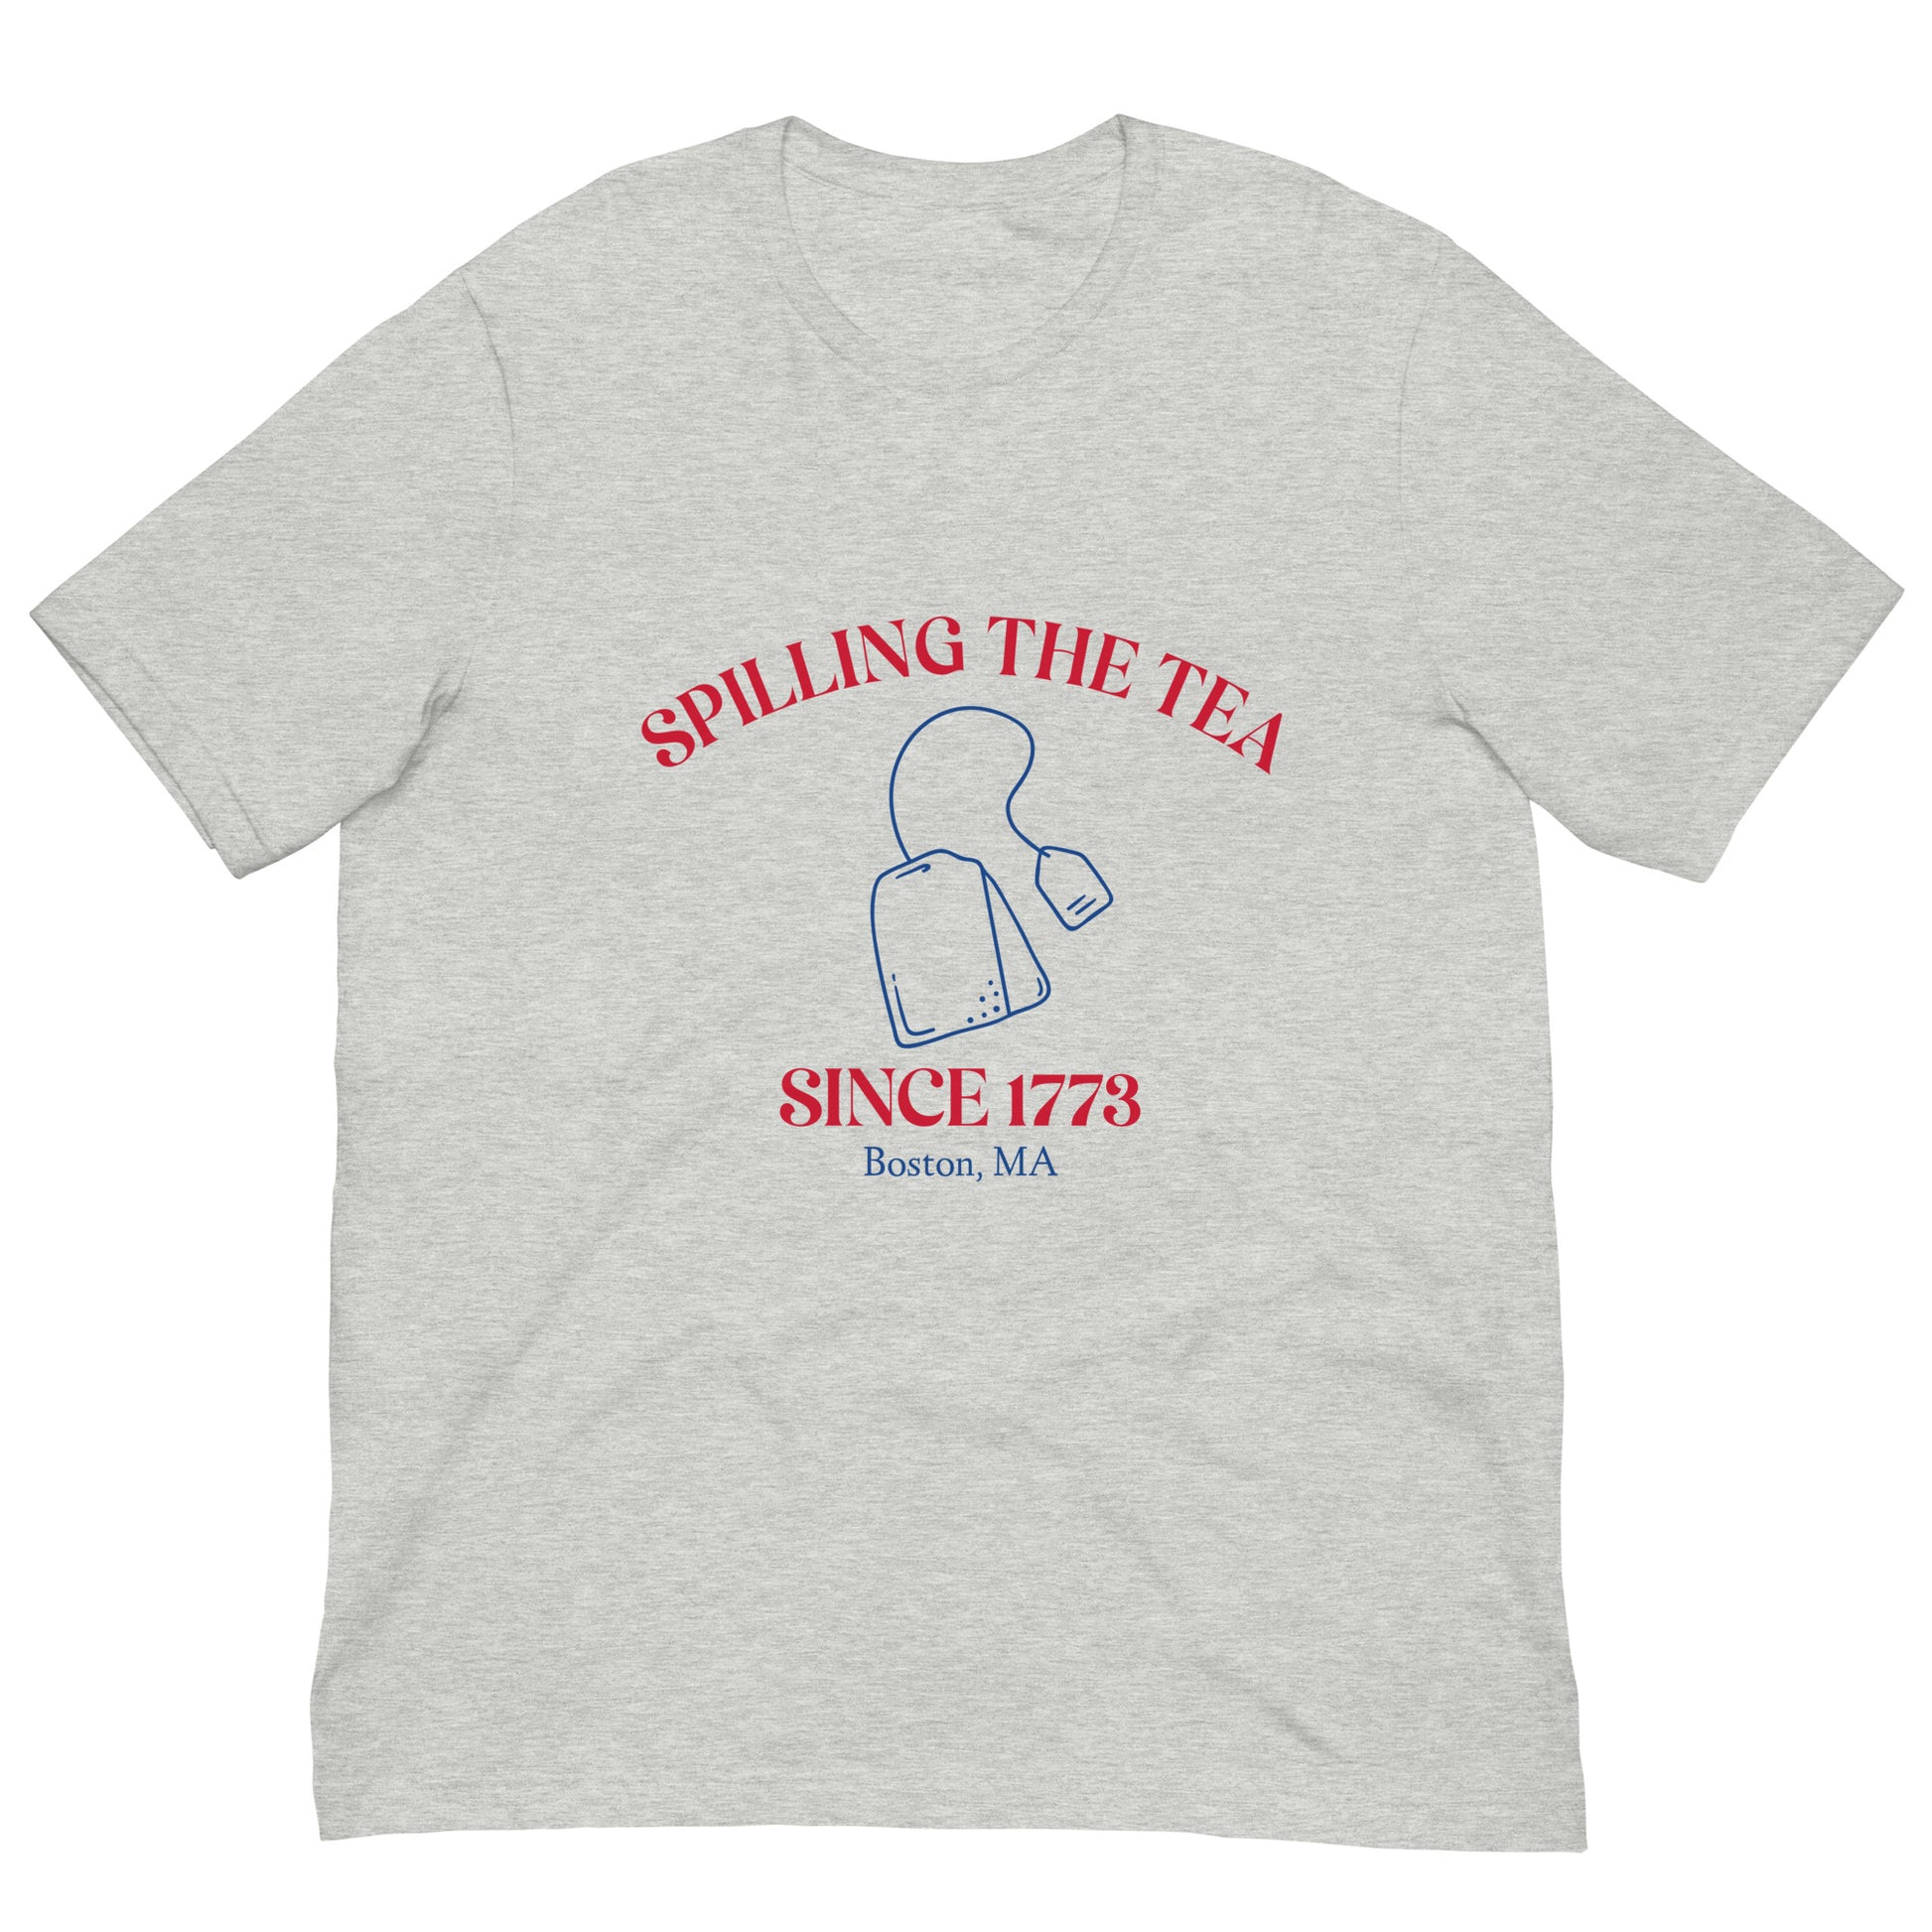 grey tshirt that say "spilling the tea since 1773" in red lettering and "Boston MA" in blue lettering with tea bag graphic in middle